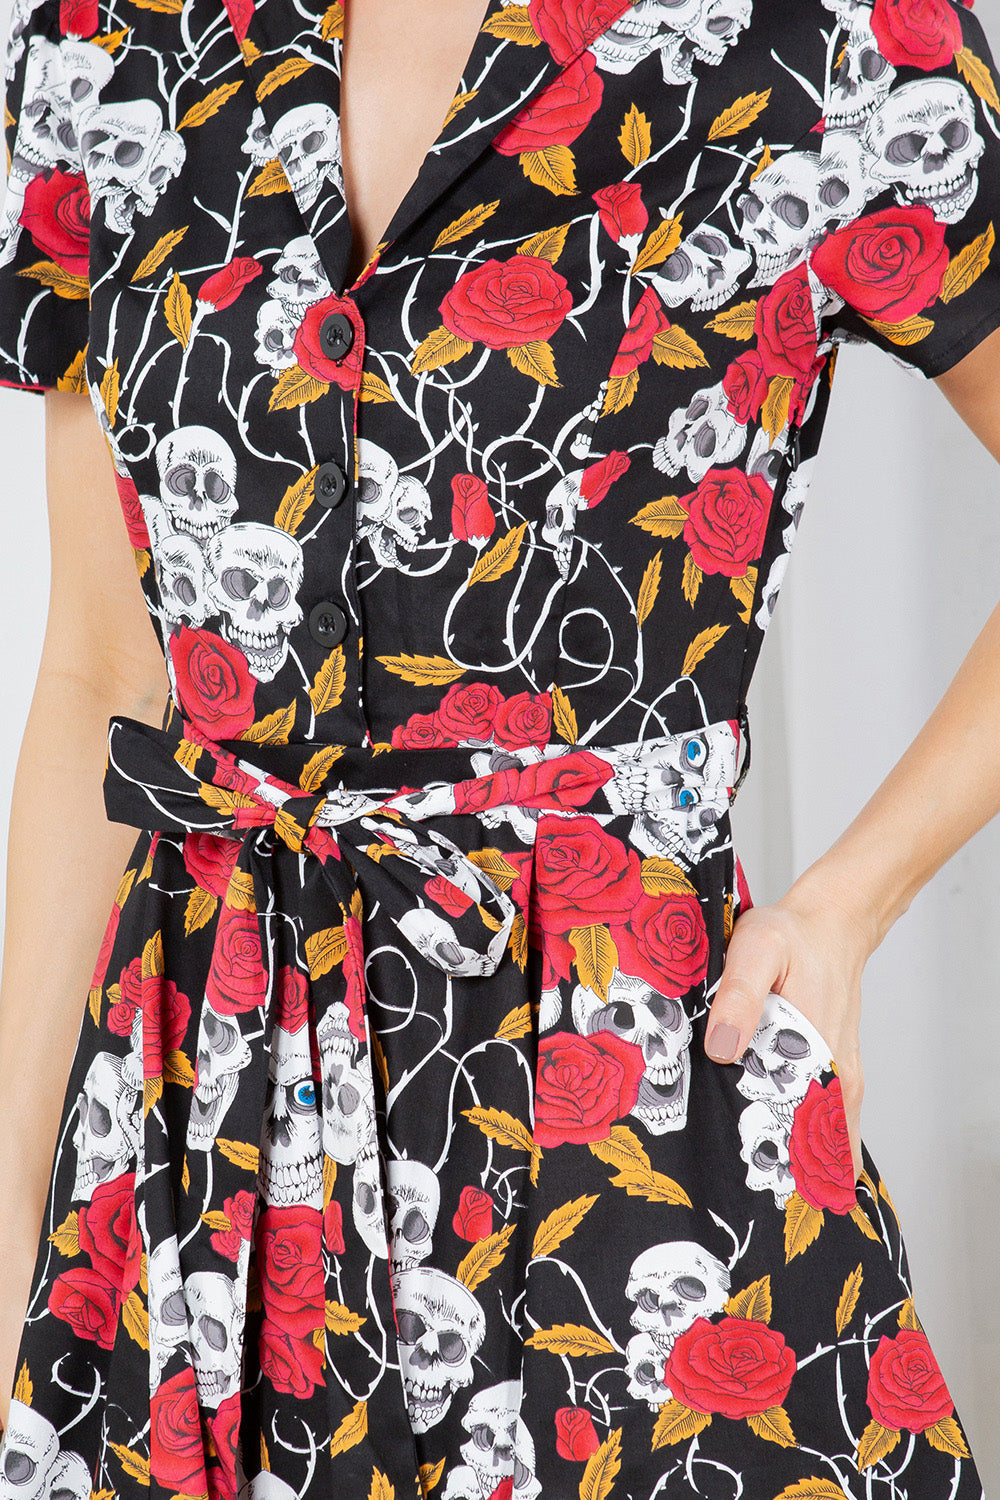 Floral And Skull Plus Size Retro Cotton Dress